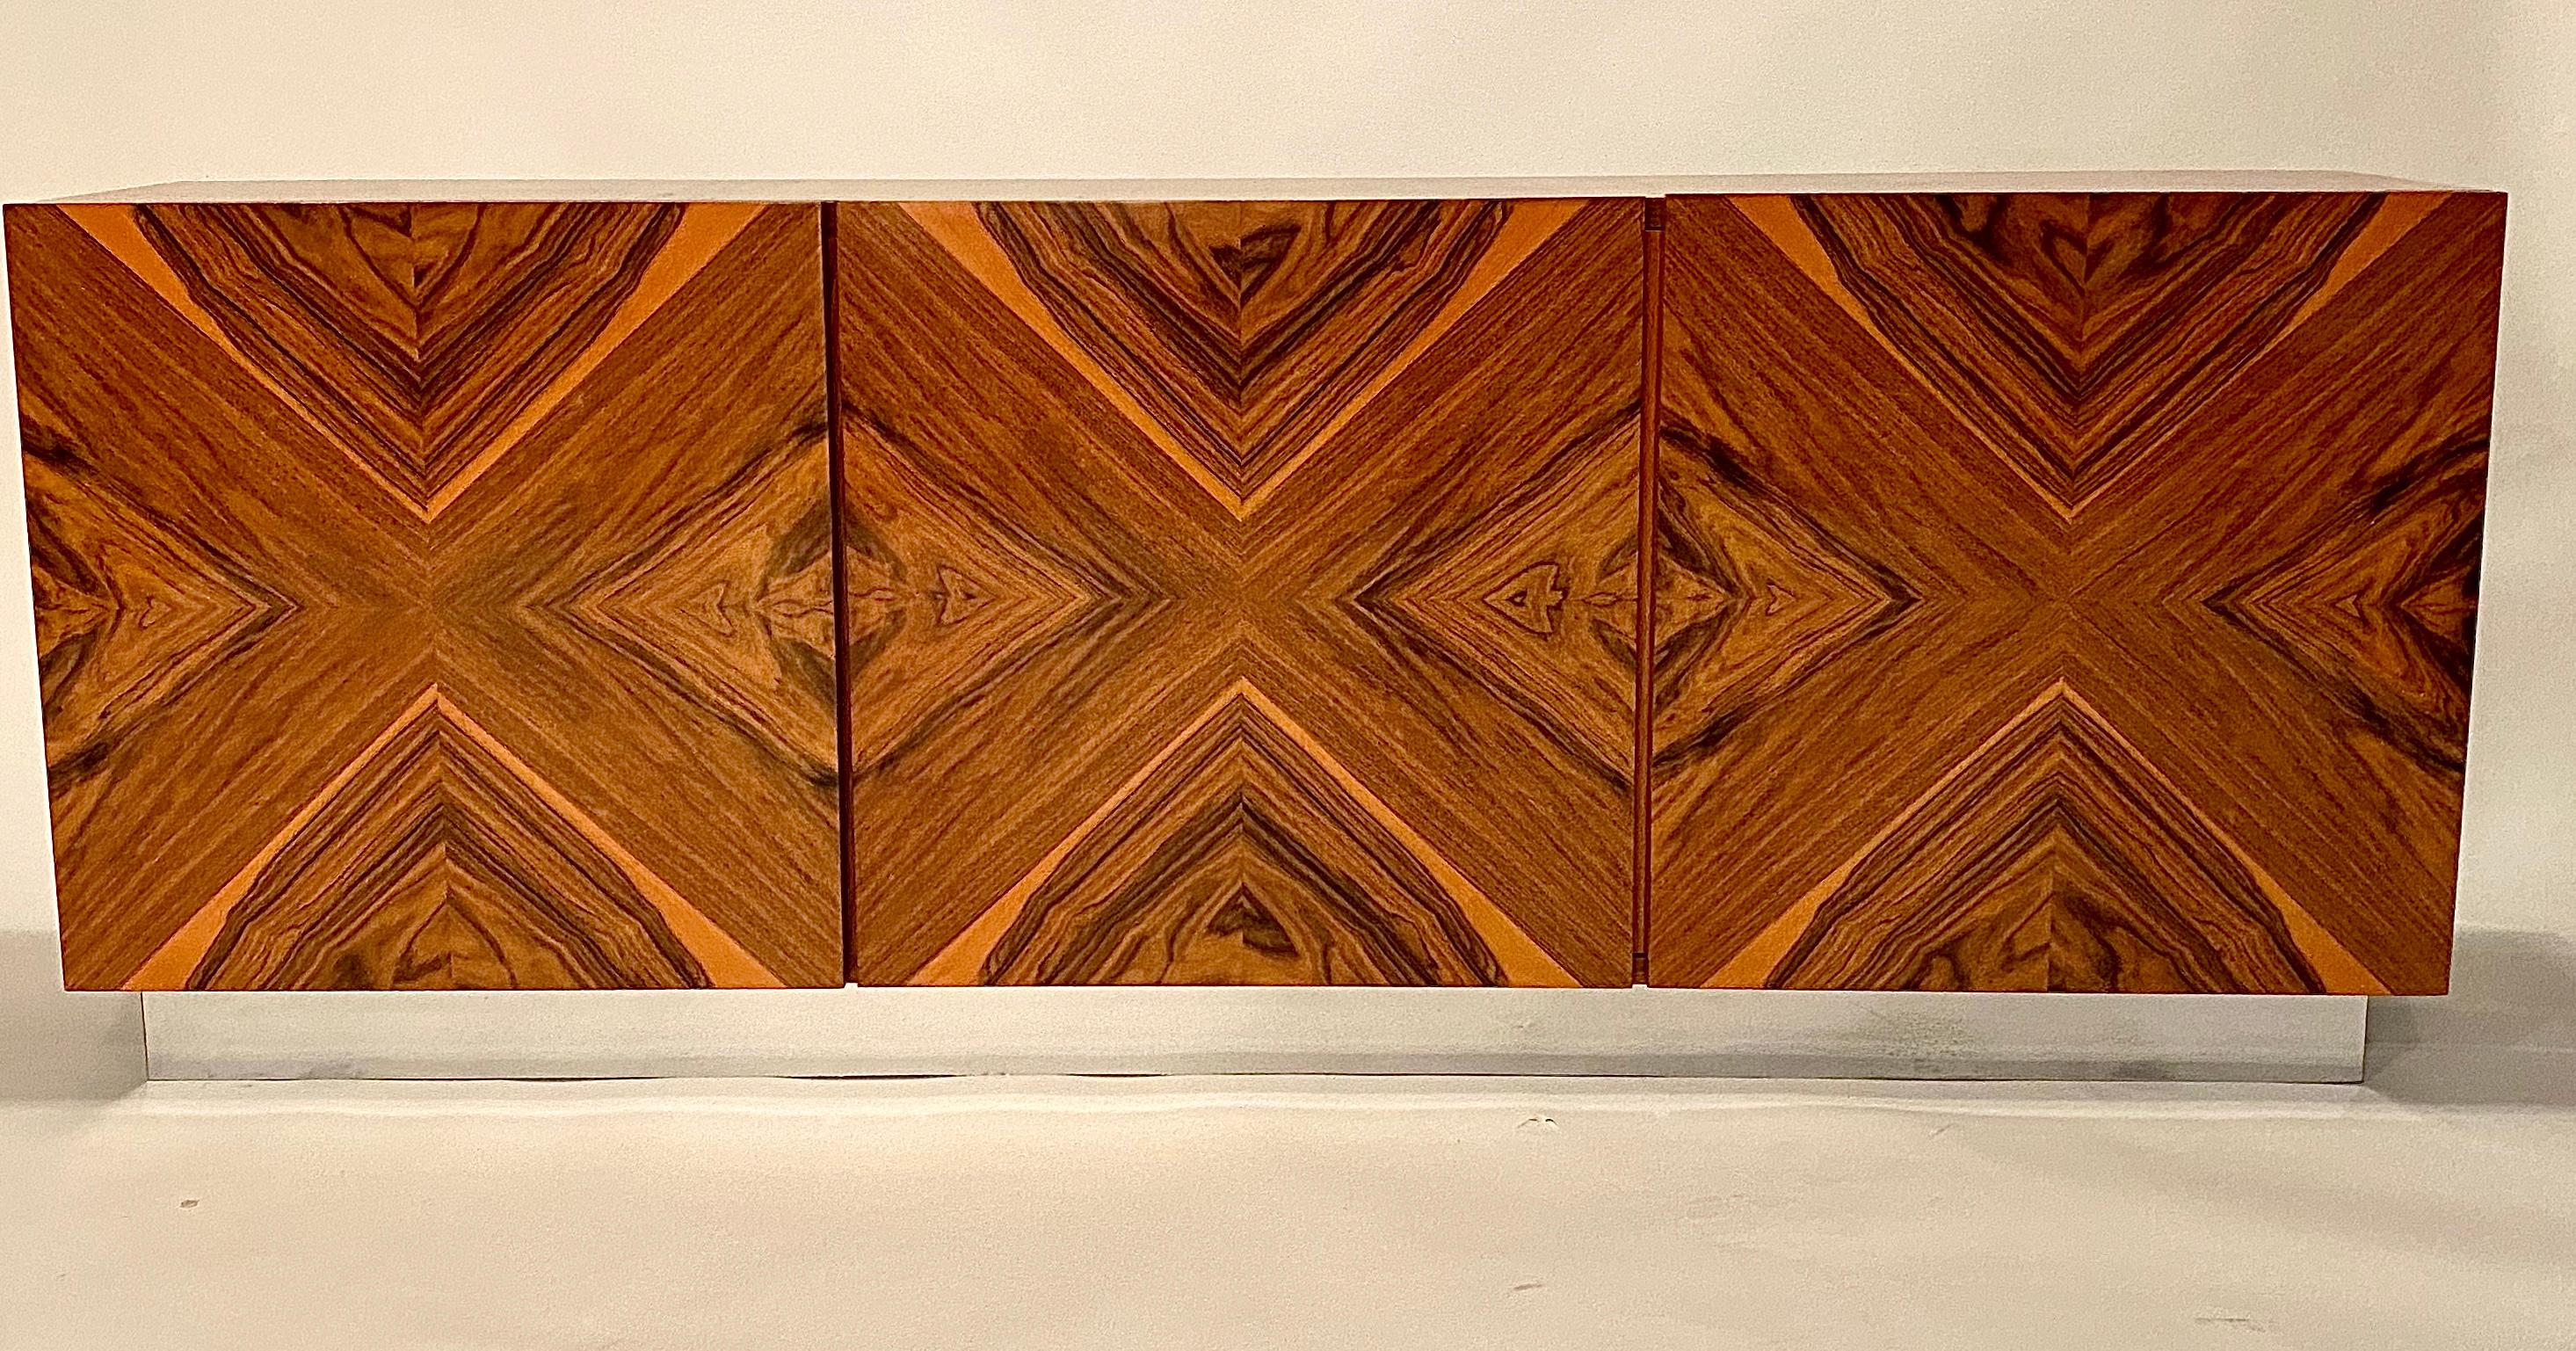 Rosewood wall mounted cabinet designed by Milo Baughman for Thayer Coggin. This rare floating wall cabinet is made in a gorgeous rosewood parquetry with a French polish finish and a chrome plinth. 

The three cabinet doors open to reveal two